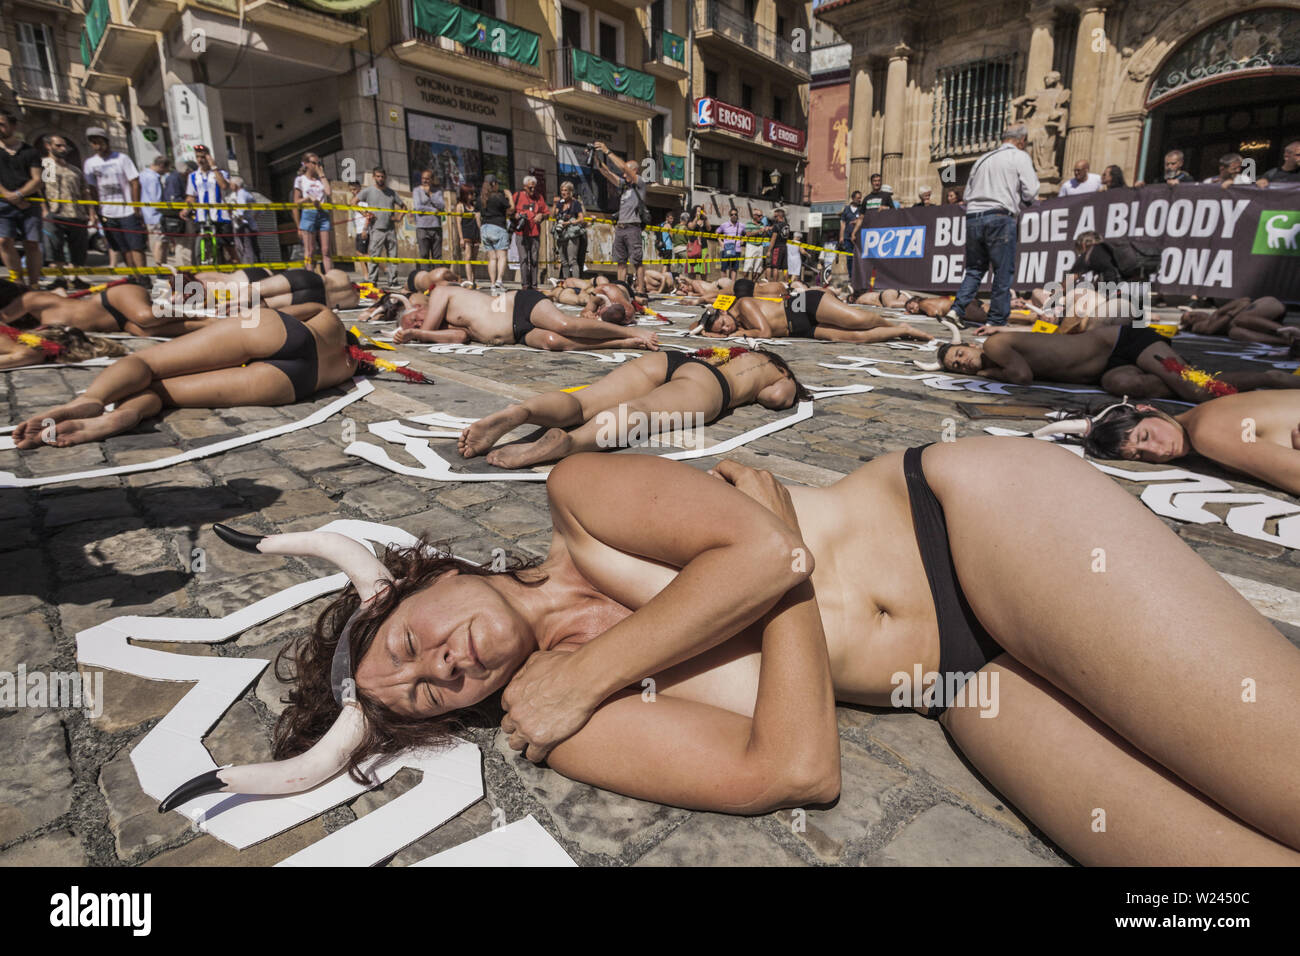 Pamplona, Navarra, Spain. 5th July, 2019. Activists against animal cruelty lie on the ground like dead bodies inside chalk outlines of bulls during a performance against bullfightings before the San Fermin celebrations in Pamplona, Spain. Credit: Celestino Arce Lavin/ZUMA Wire/Alamy Live News Stock Photo